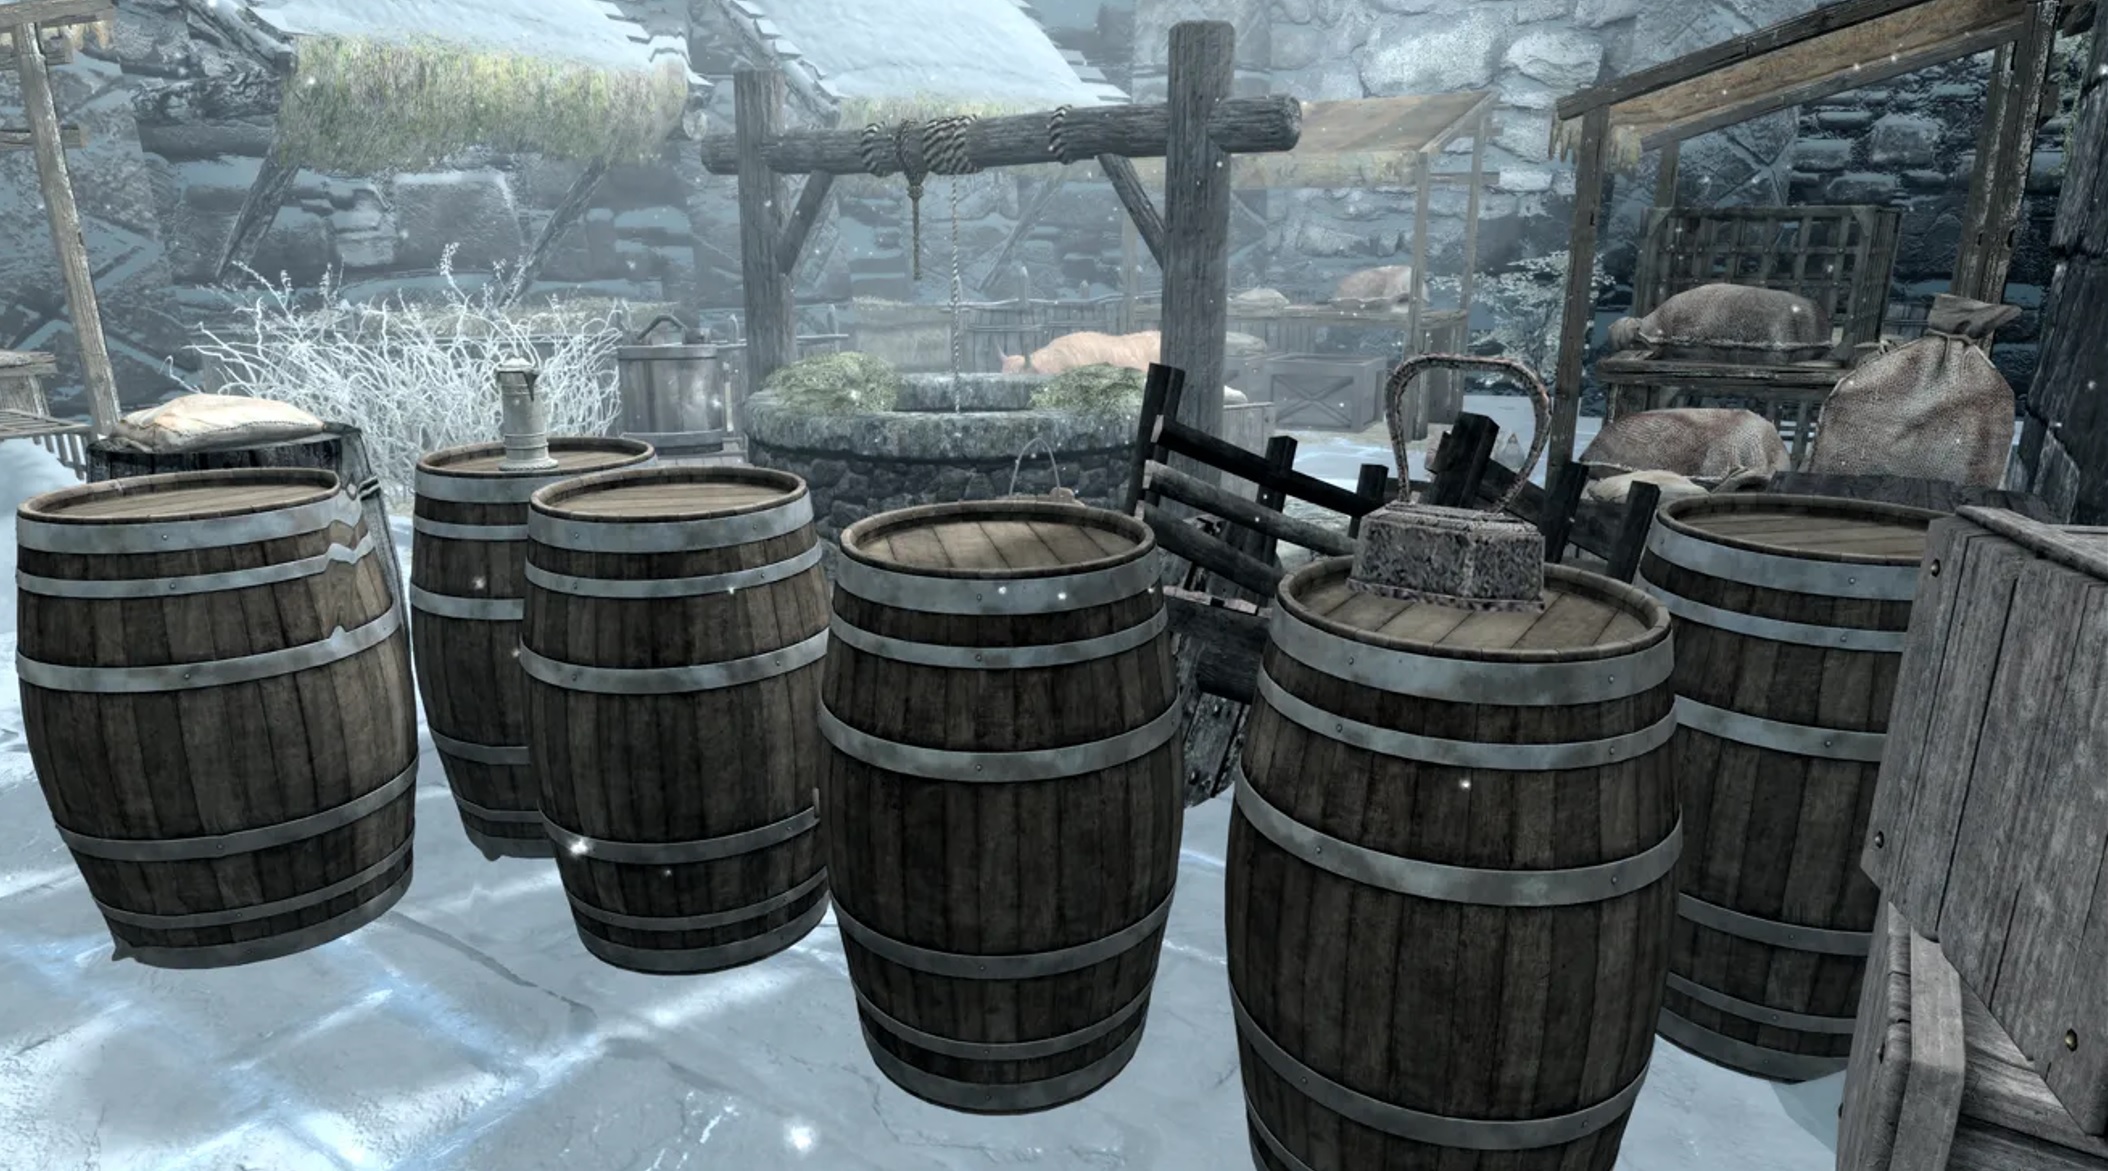 Ever notice how every dungeon or battlefield in Western RPGs is littered with destructible crates and barrels? “The Elder Scrolls V: Skyrim” takes this trope to new heights. As the Dragonborn, you’re not just a hero; you’re also a professional crate-smasher. :: Bethesda 